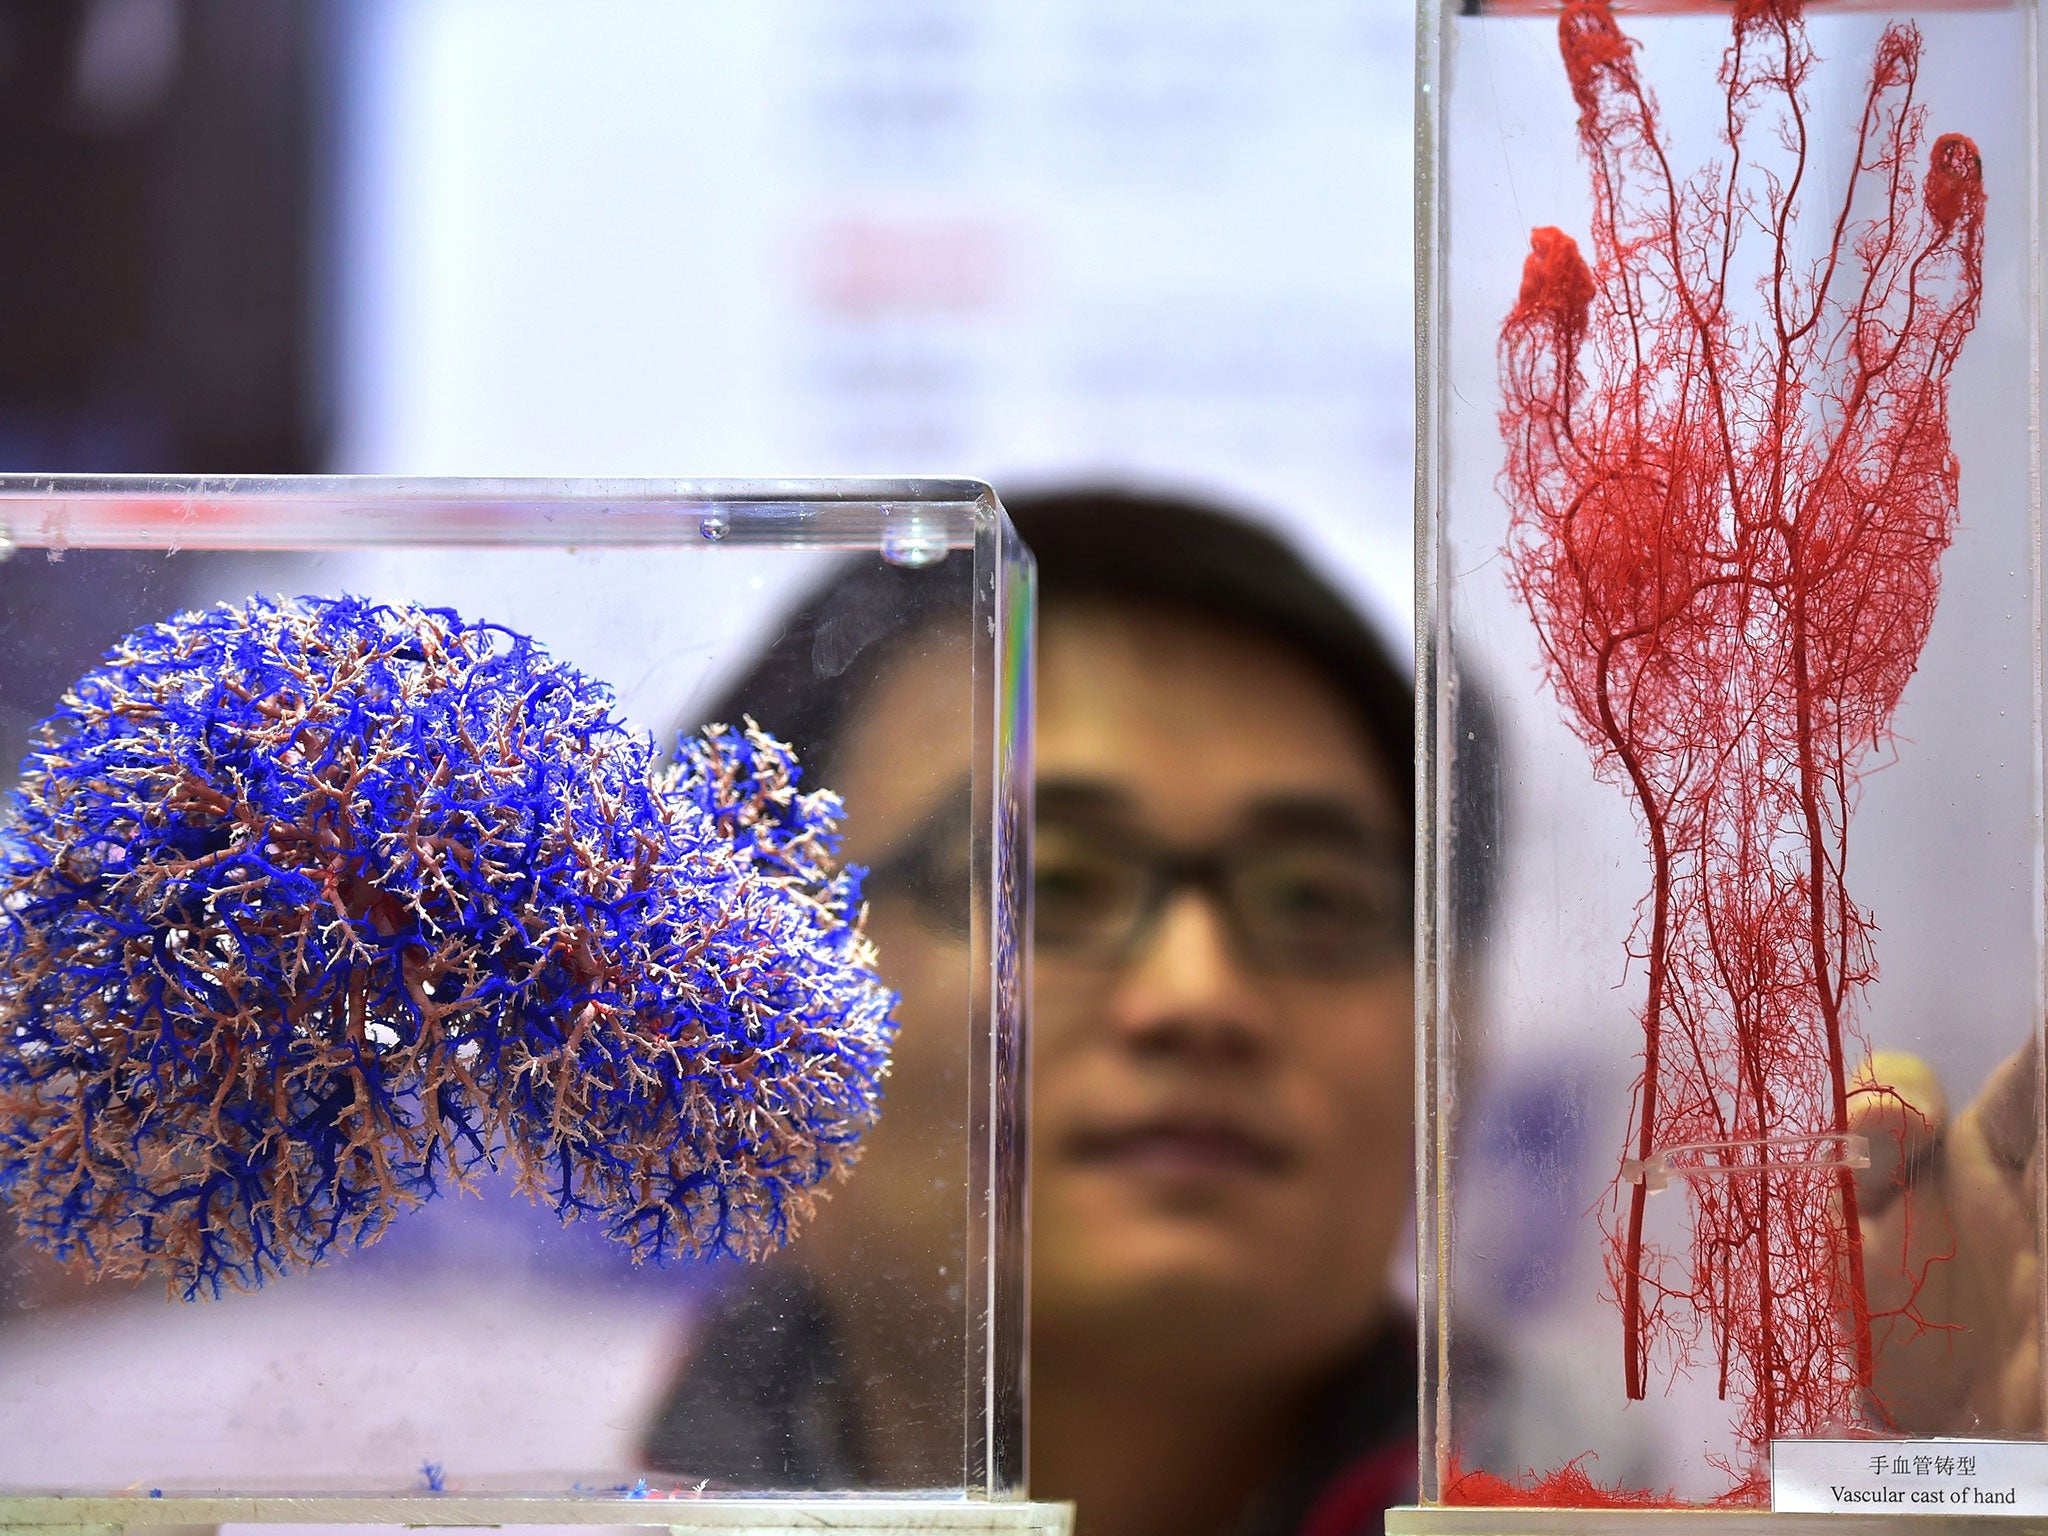 New technologies will soon make it able to print living tissue, cartilage and bone